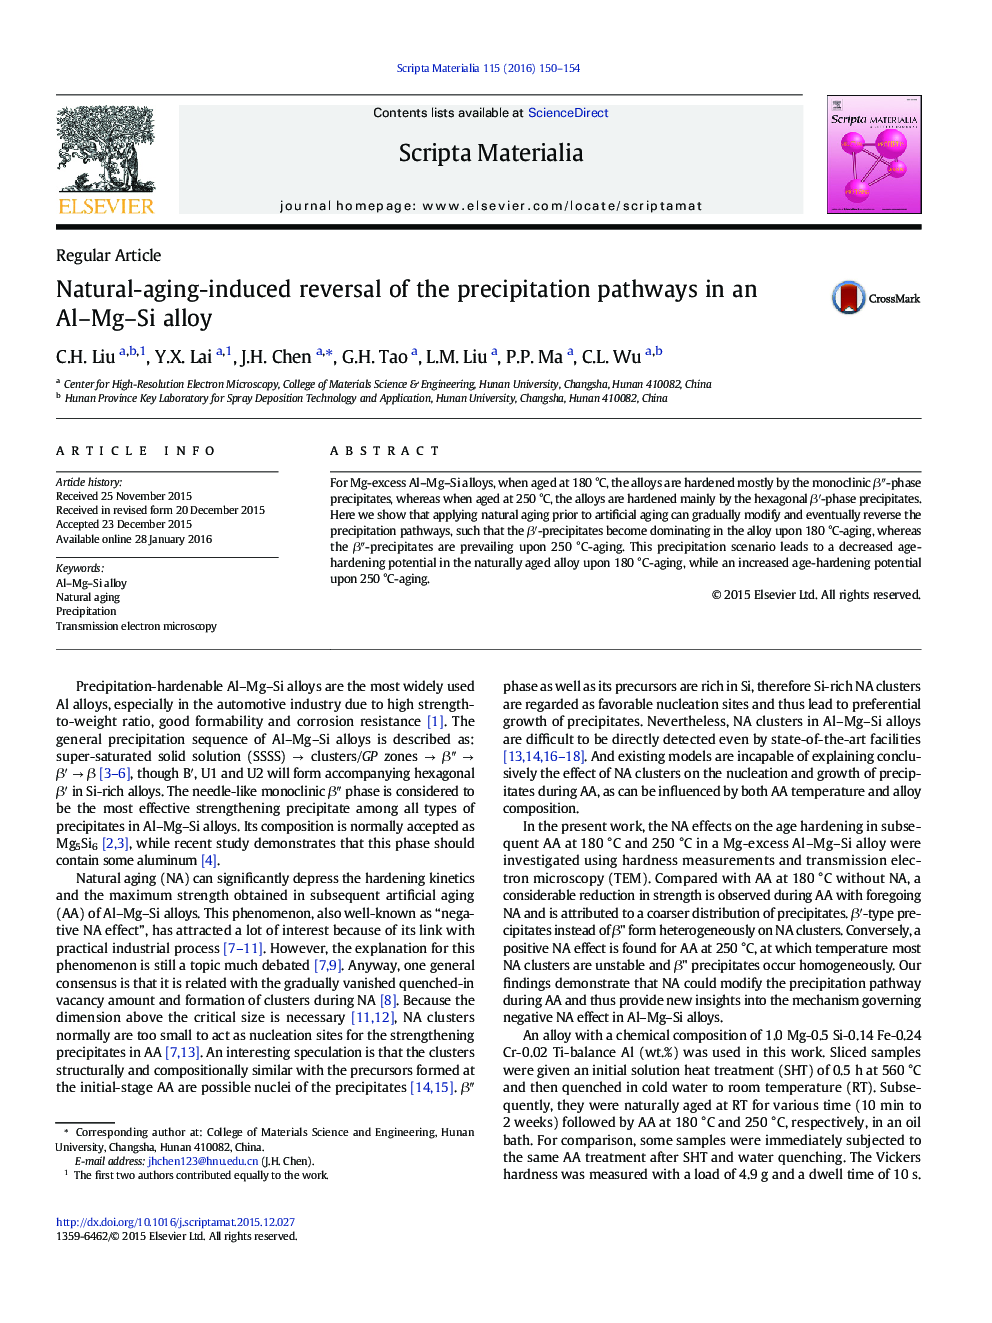 Natural-aging-induced reversal of the precipitation pathways in an Al-Mg-Si alloy